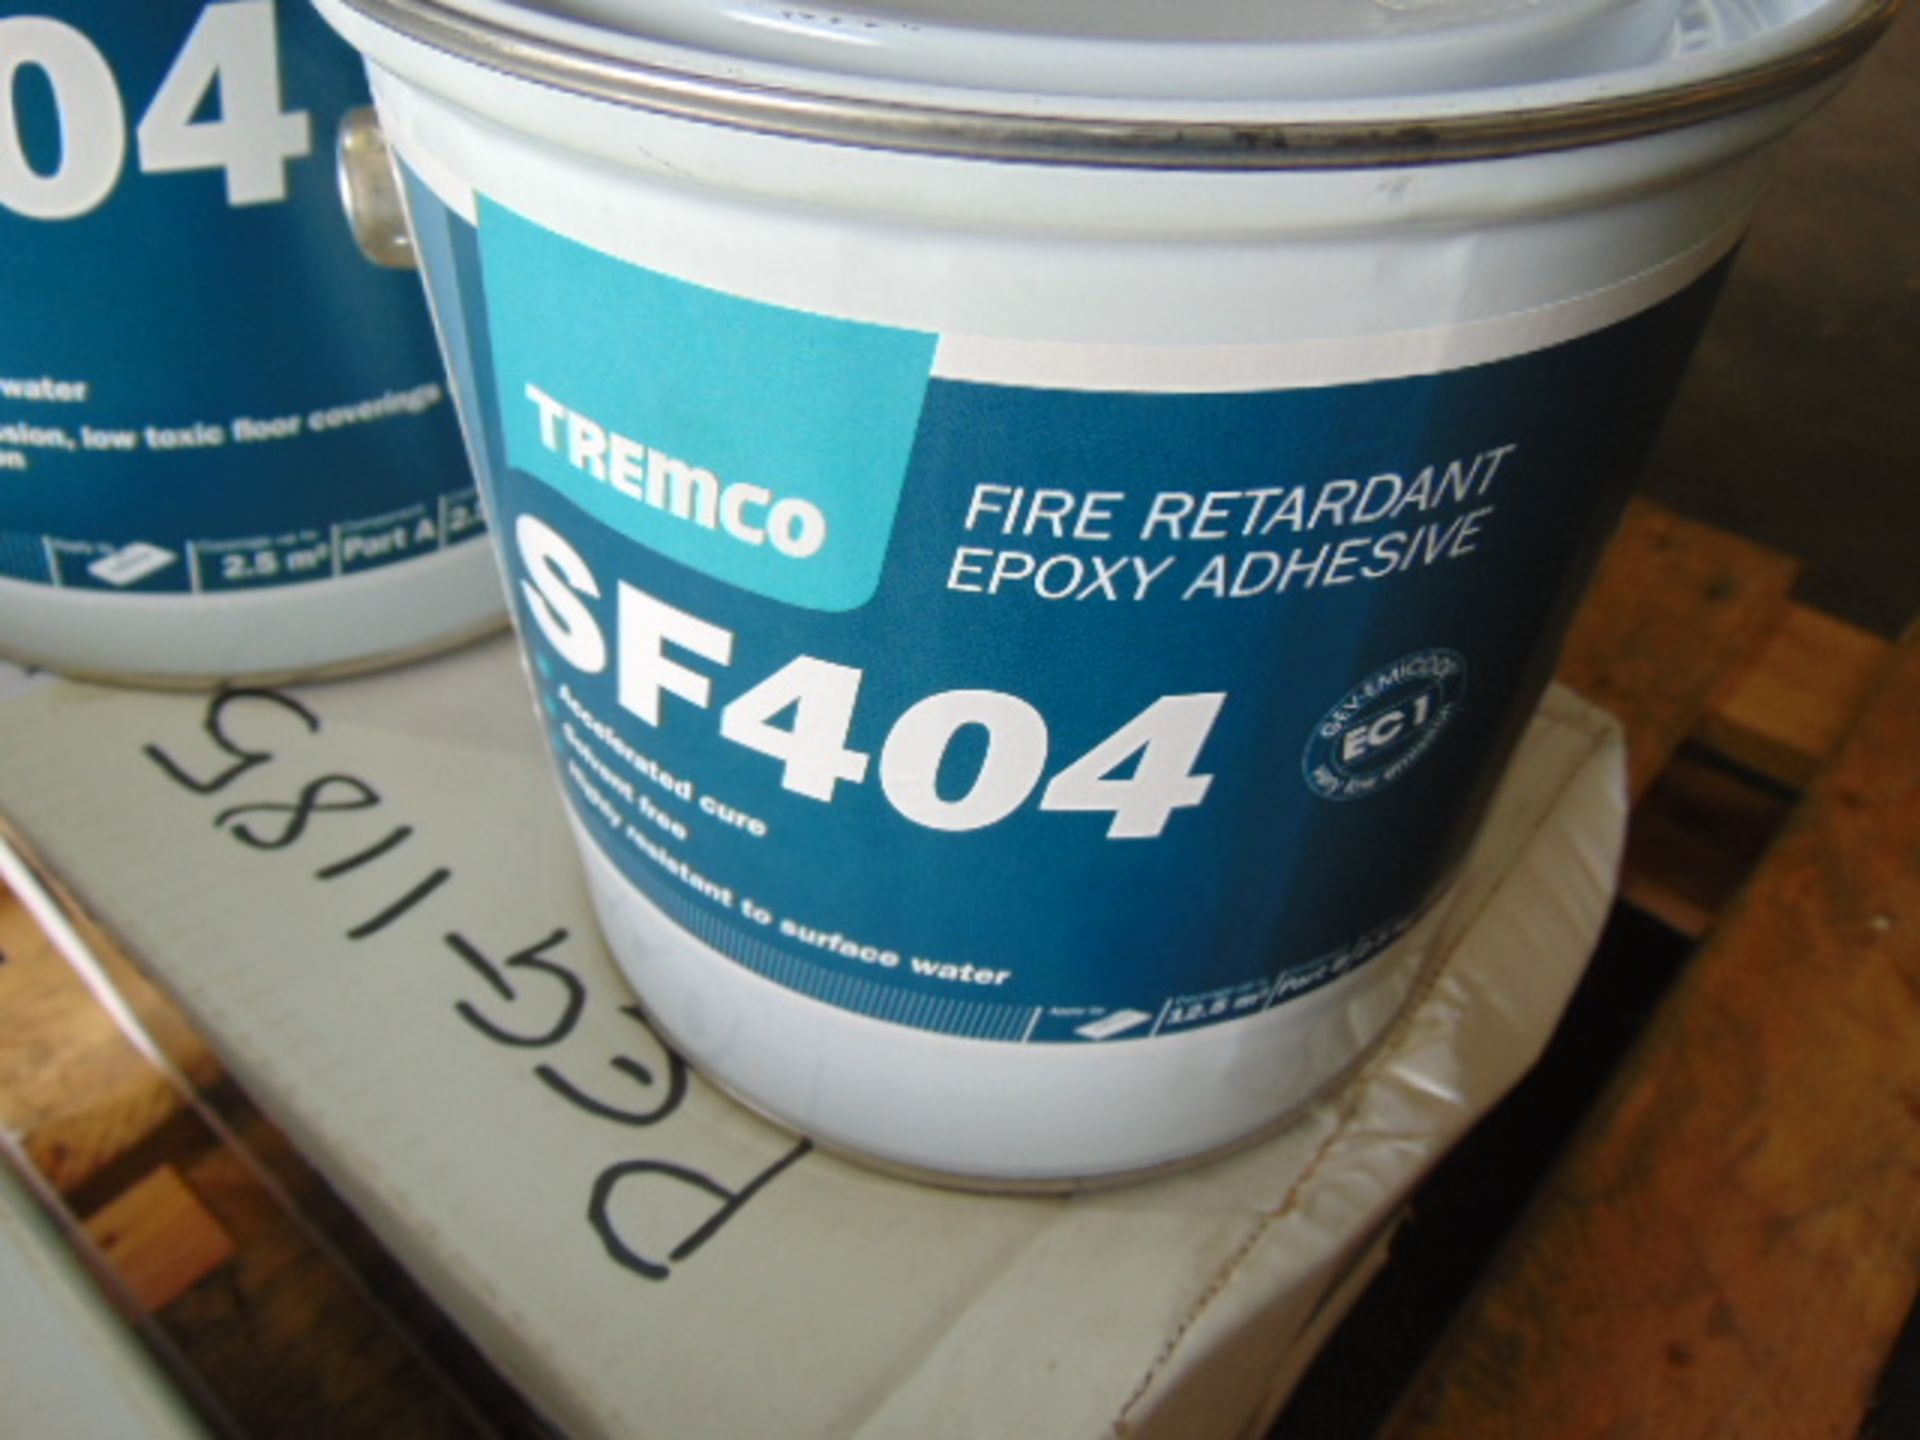 Qty 2 x Tremco SF404 Fire Retardant Epoxy Adhesive Direct from Reserve Stores - Image 3 of 3